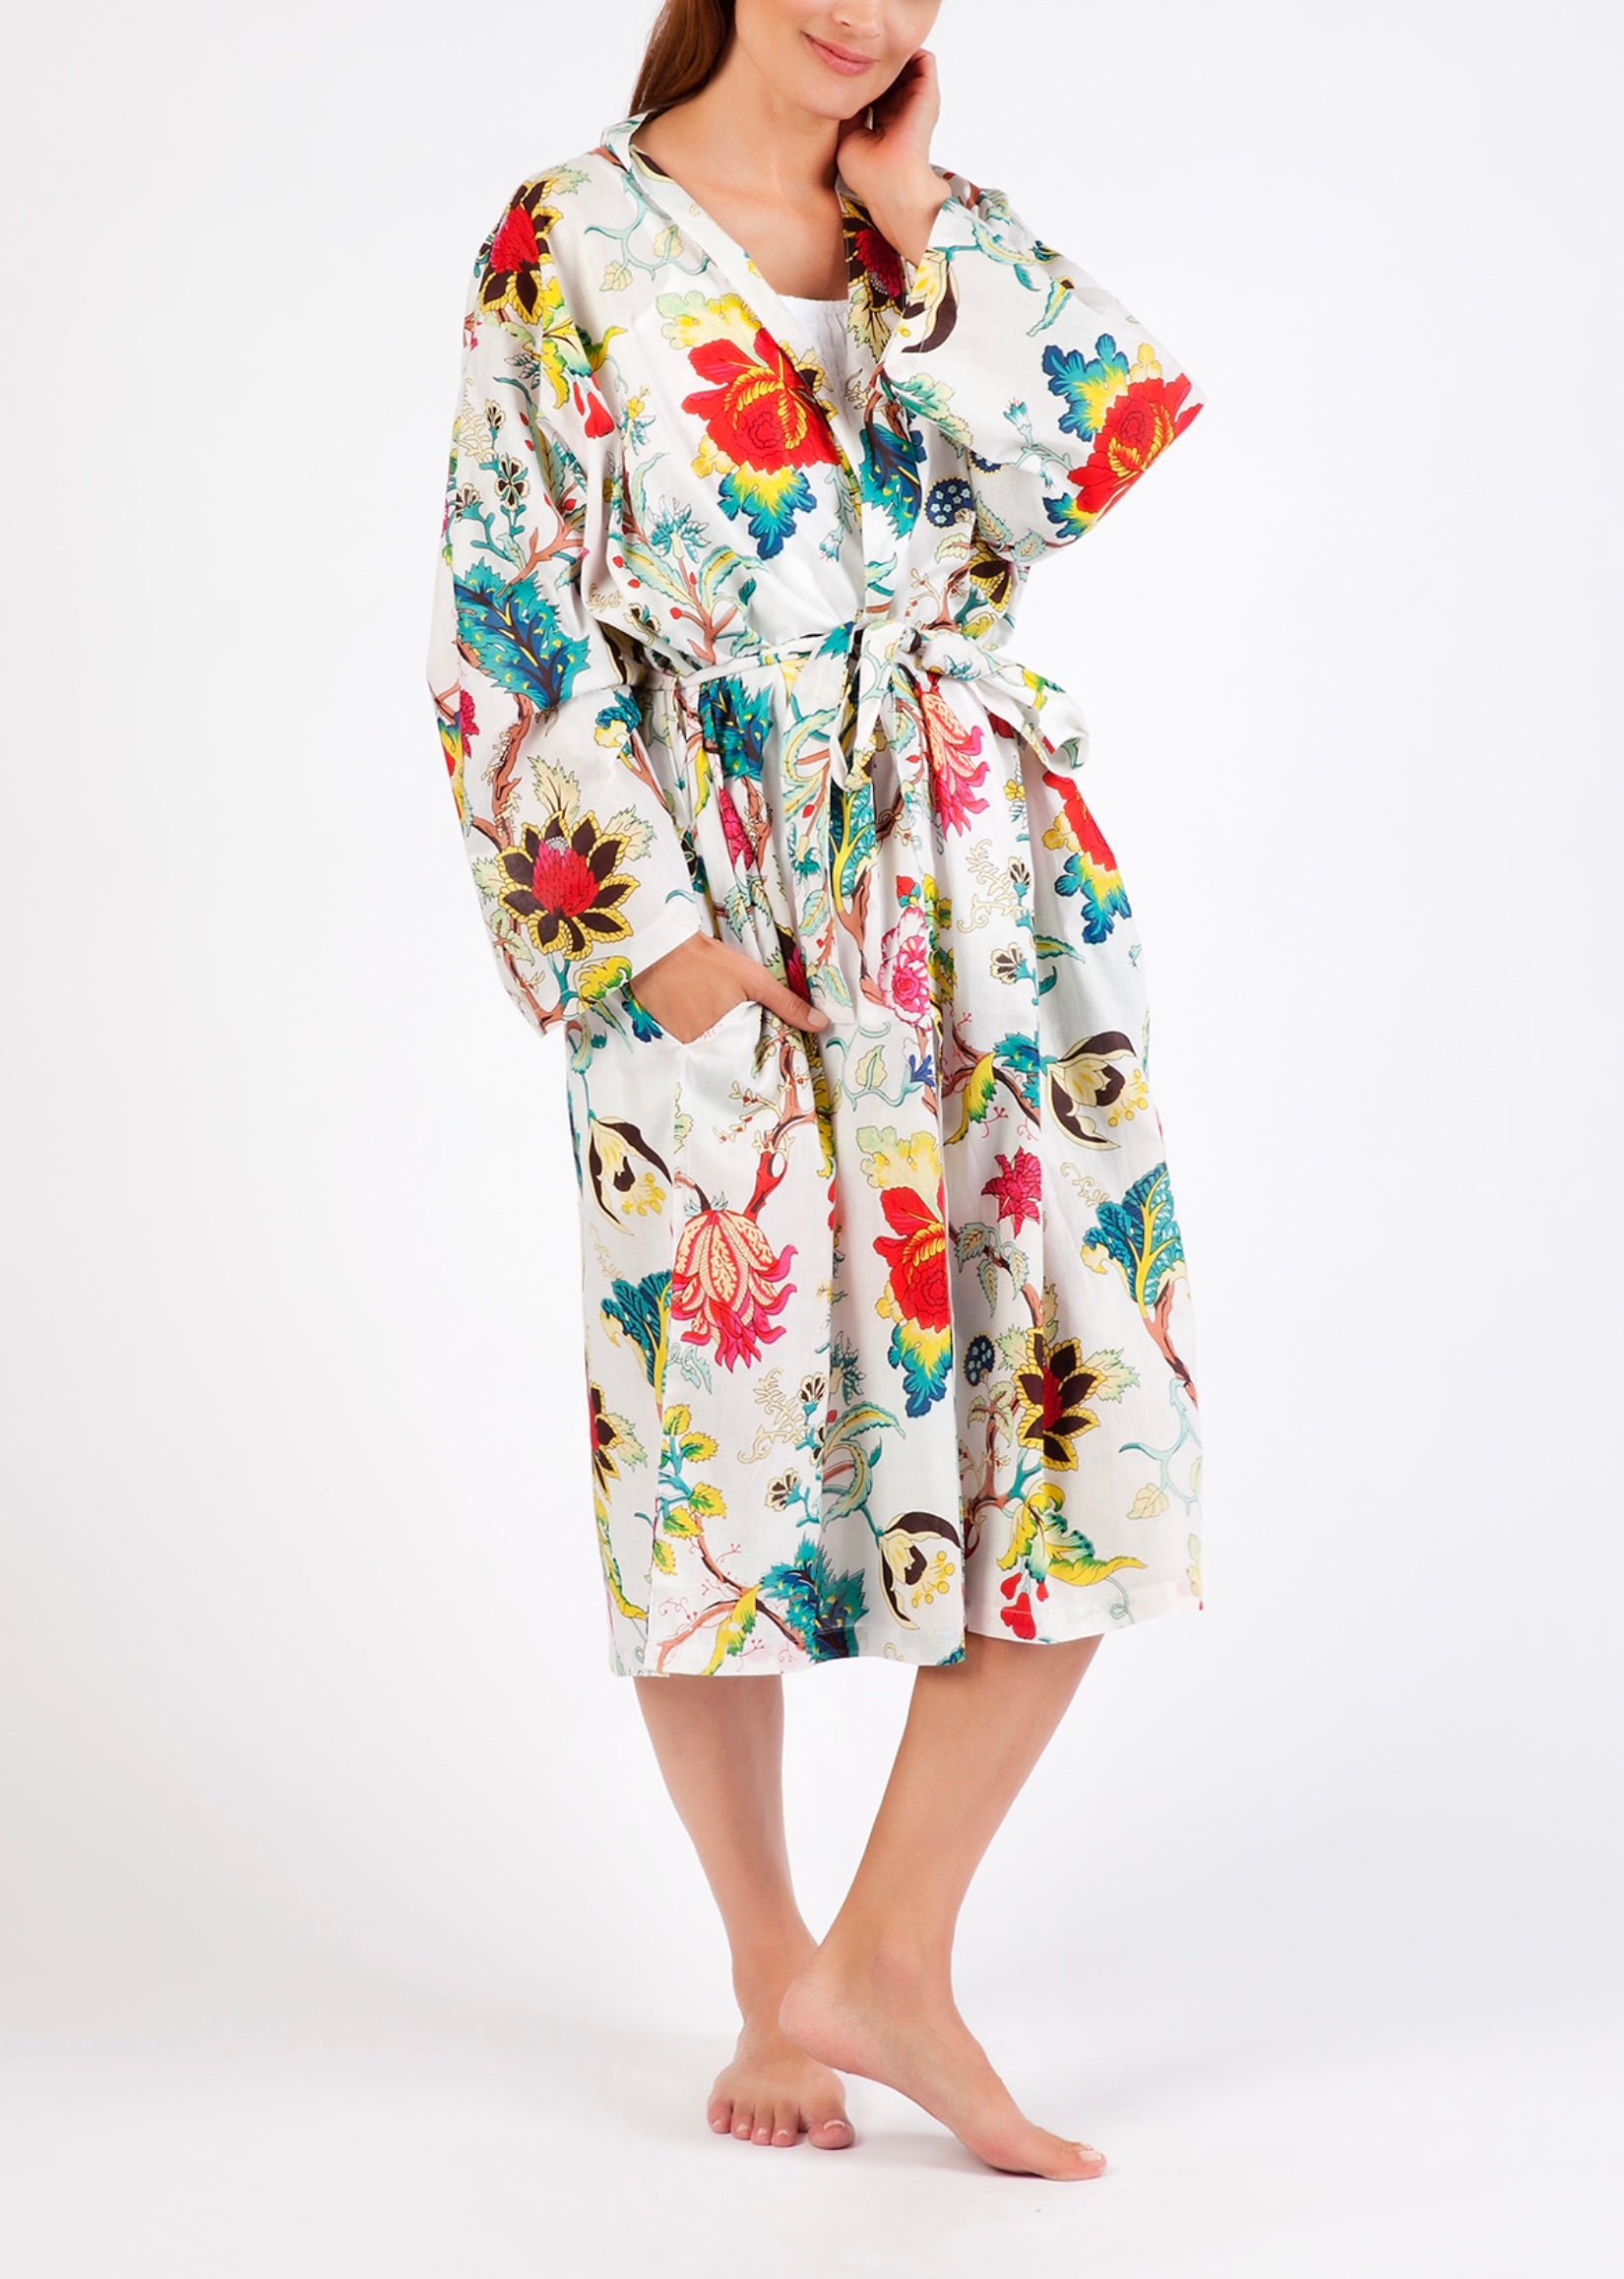 Hand Block Printed Dressing Gown - Red/White Flower